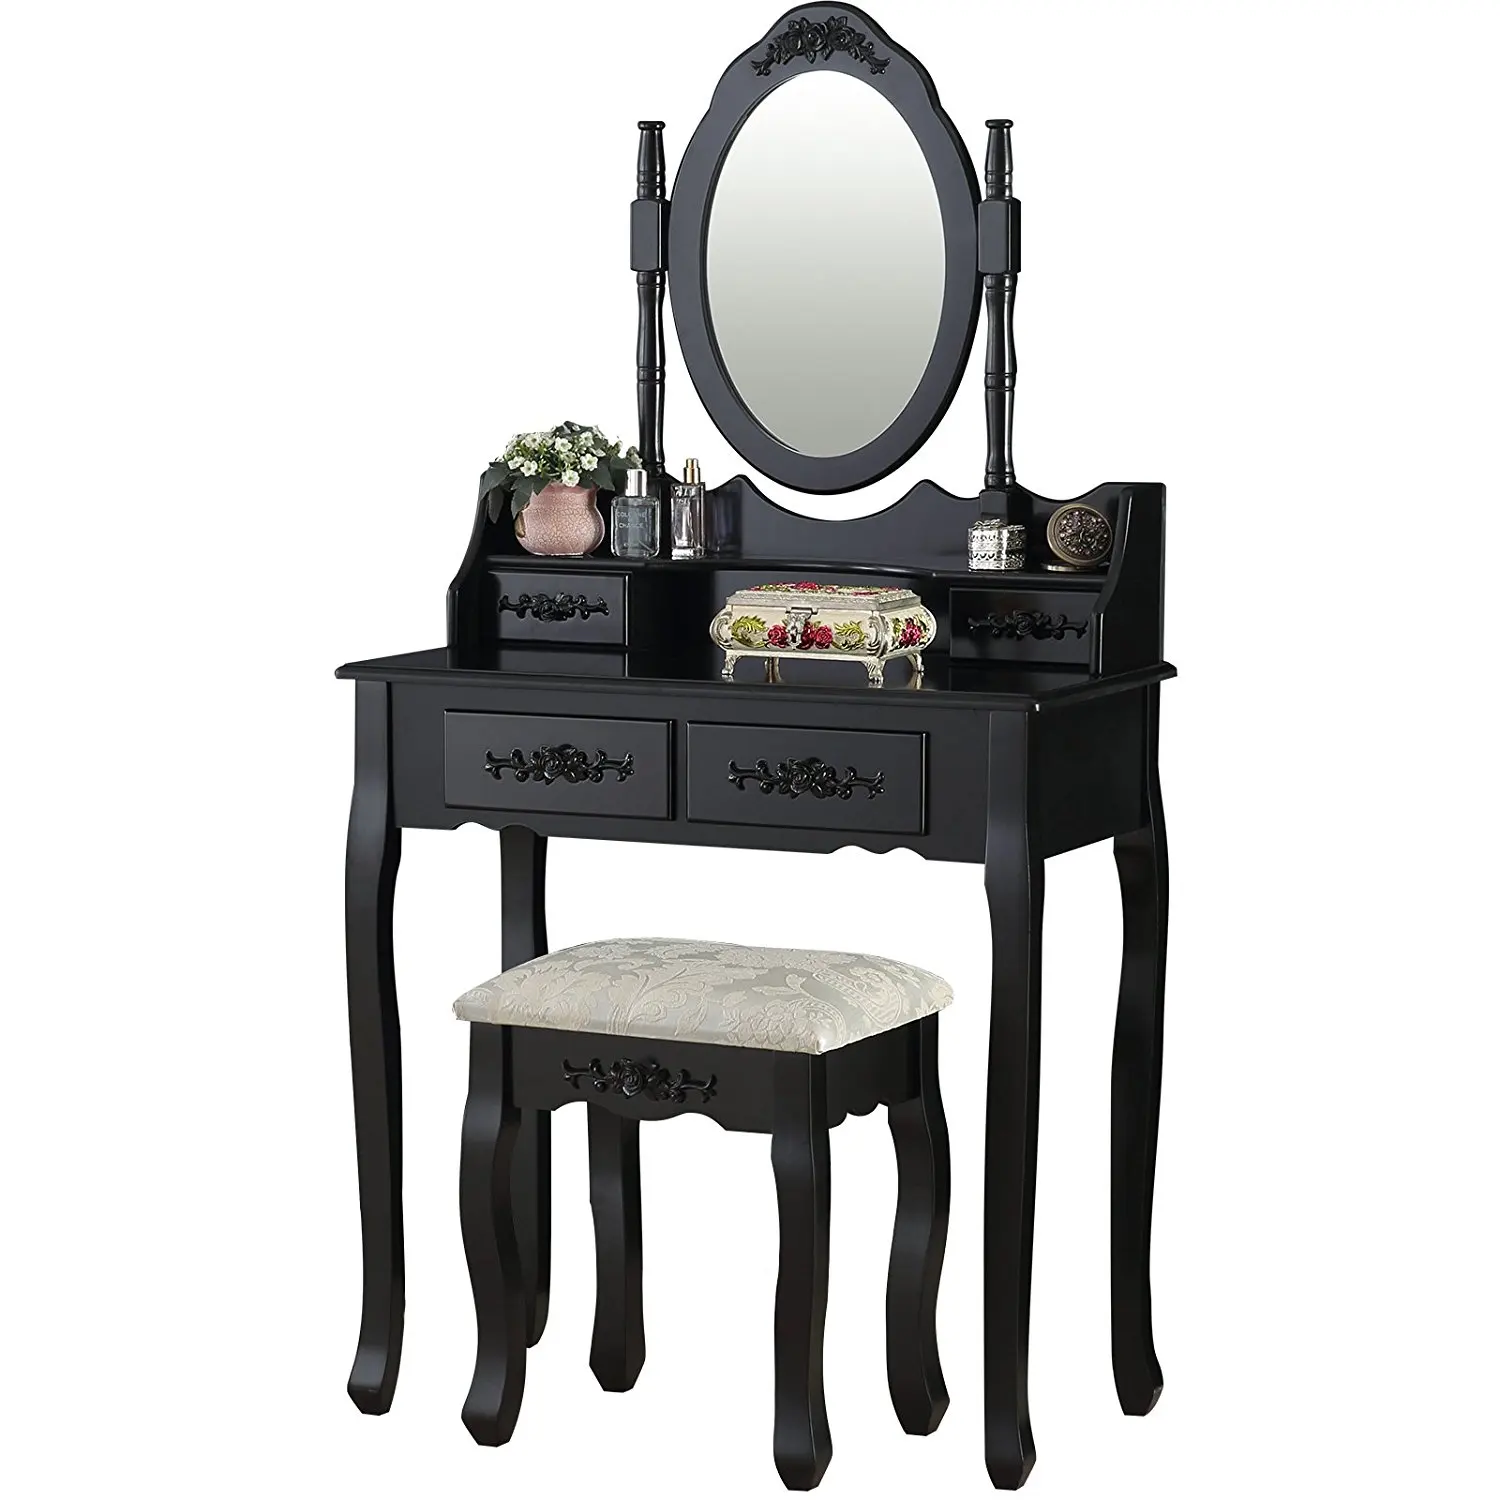 Mirrored Consoles Wooden Mirror Dresser For Girls With Storages